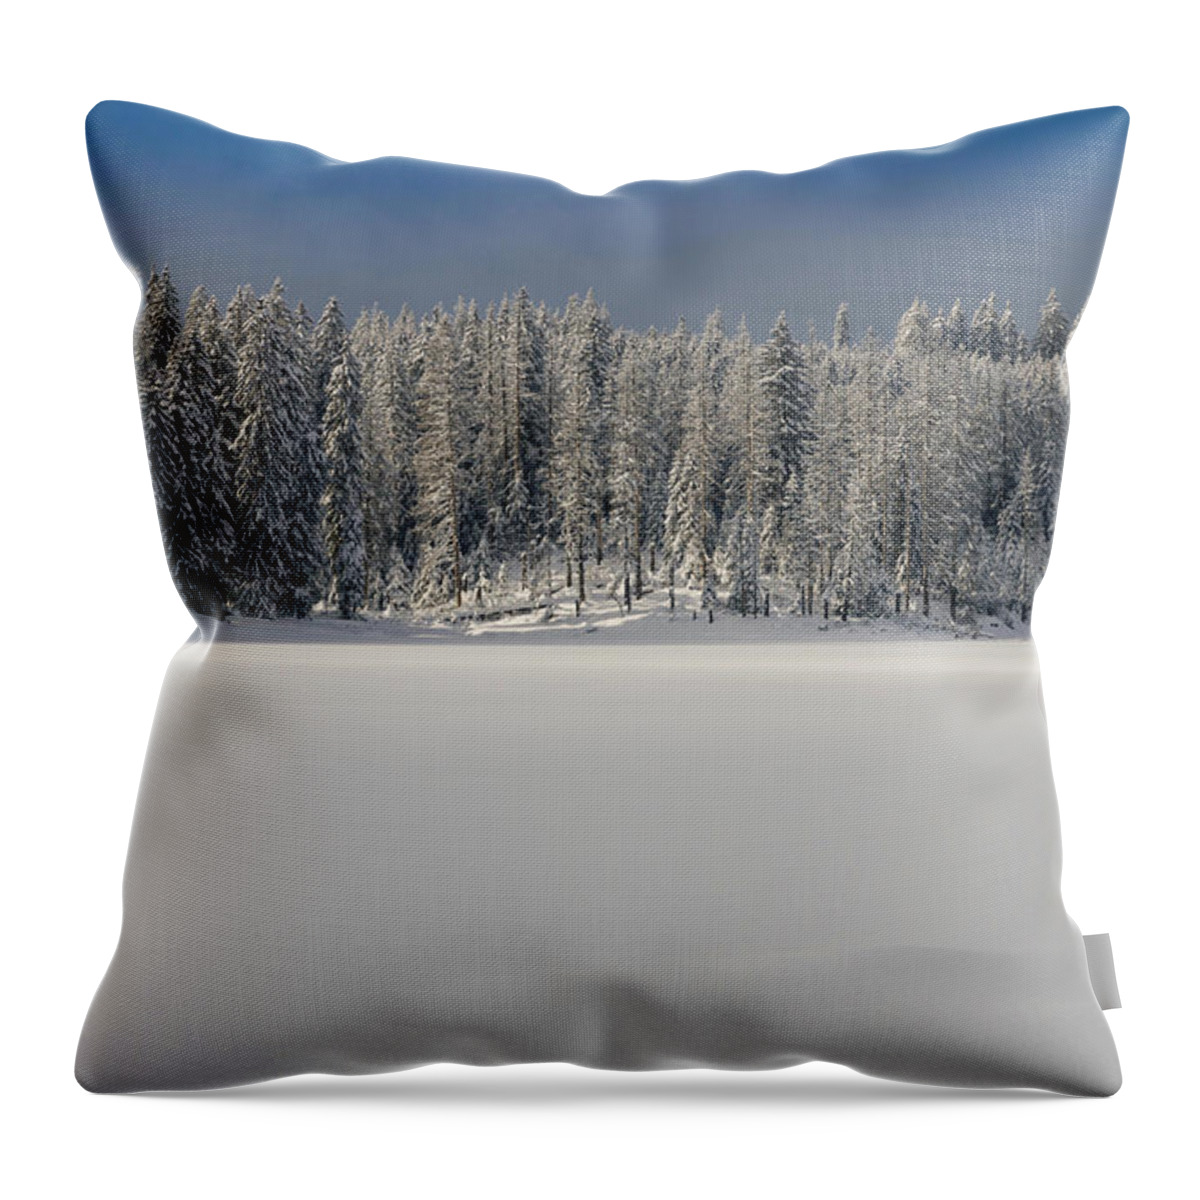 Abenteuer Throw Pillow featuring the photograph Oderteich by Andreas Levi